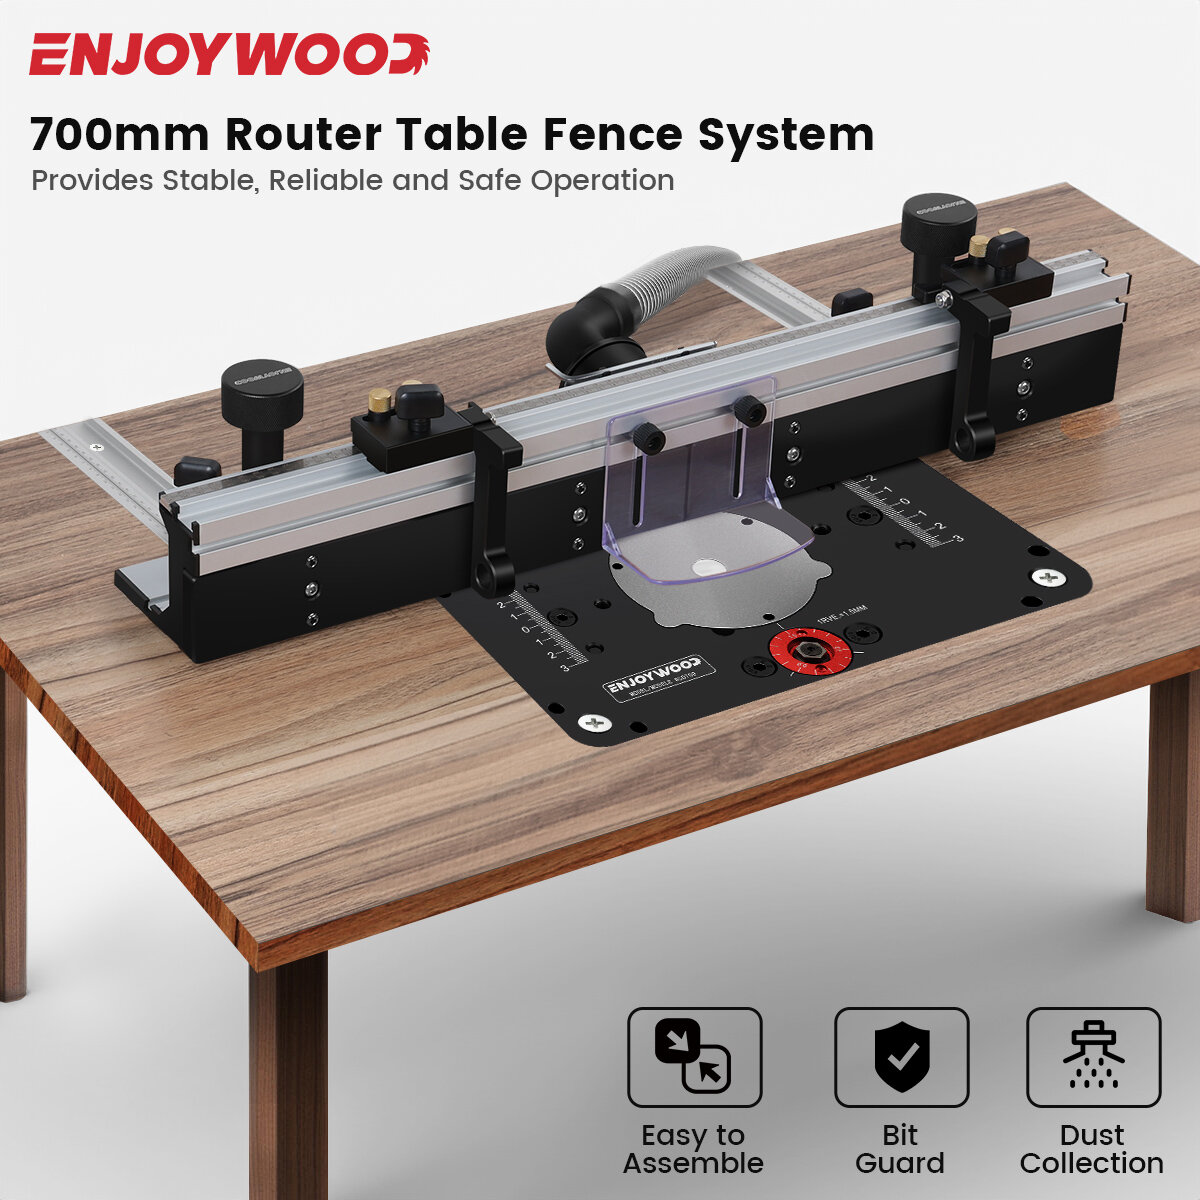 ENJOYWOOD Wnew Woodworking Router Table Fence Aluminium Profile Fence System 700mm with Sliding Brackets Bit Guard COD